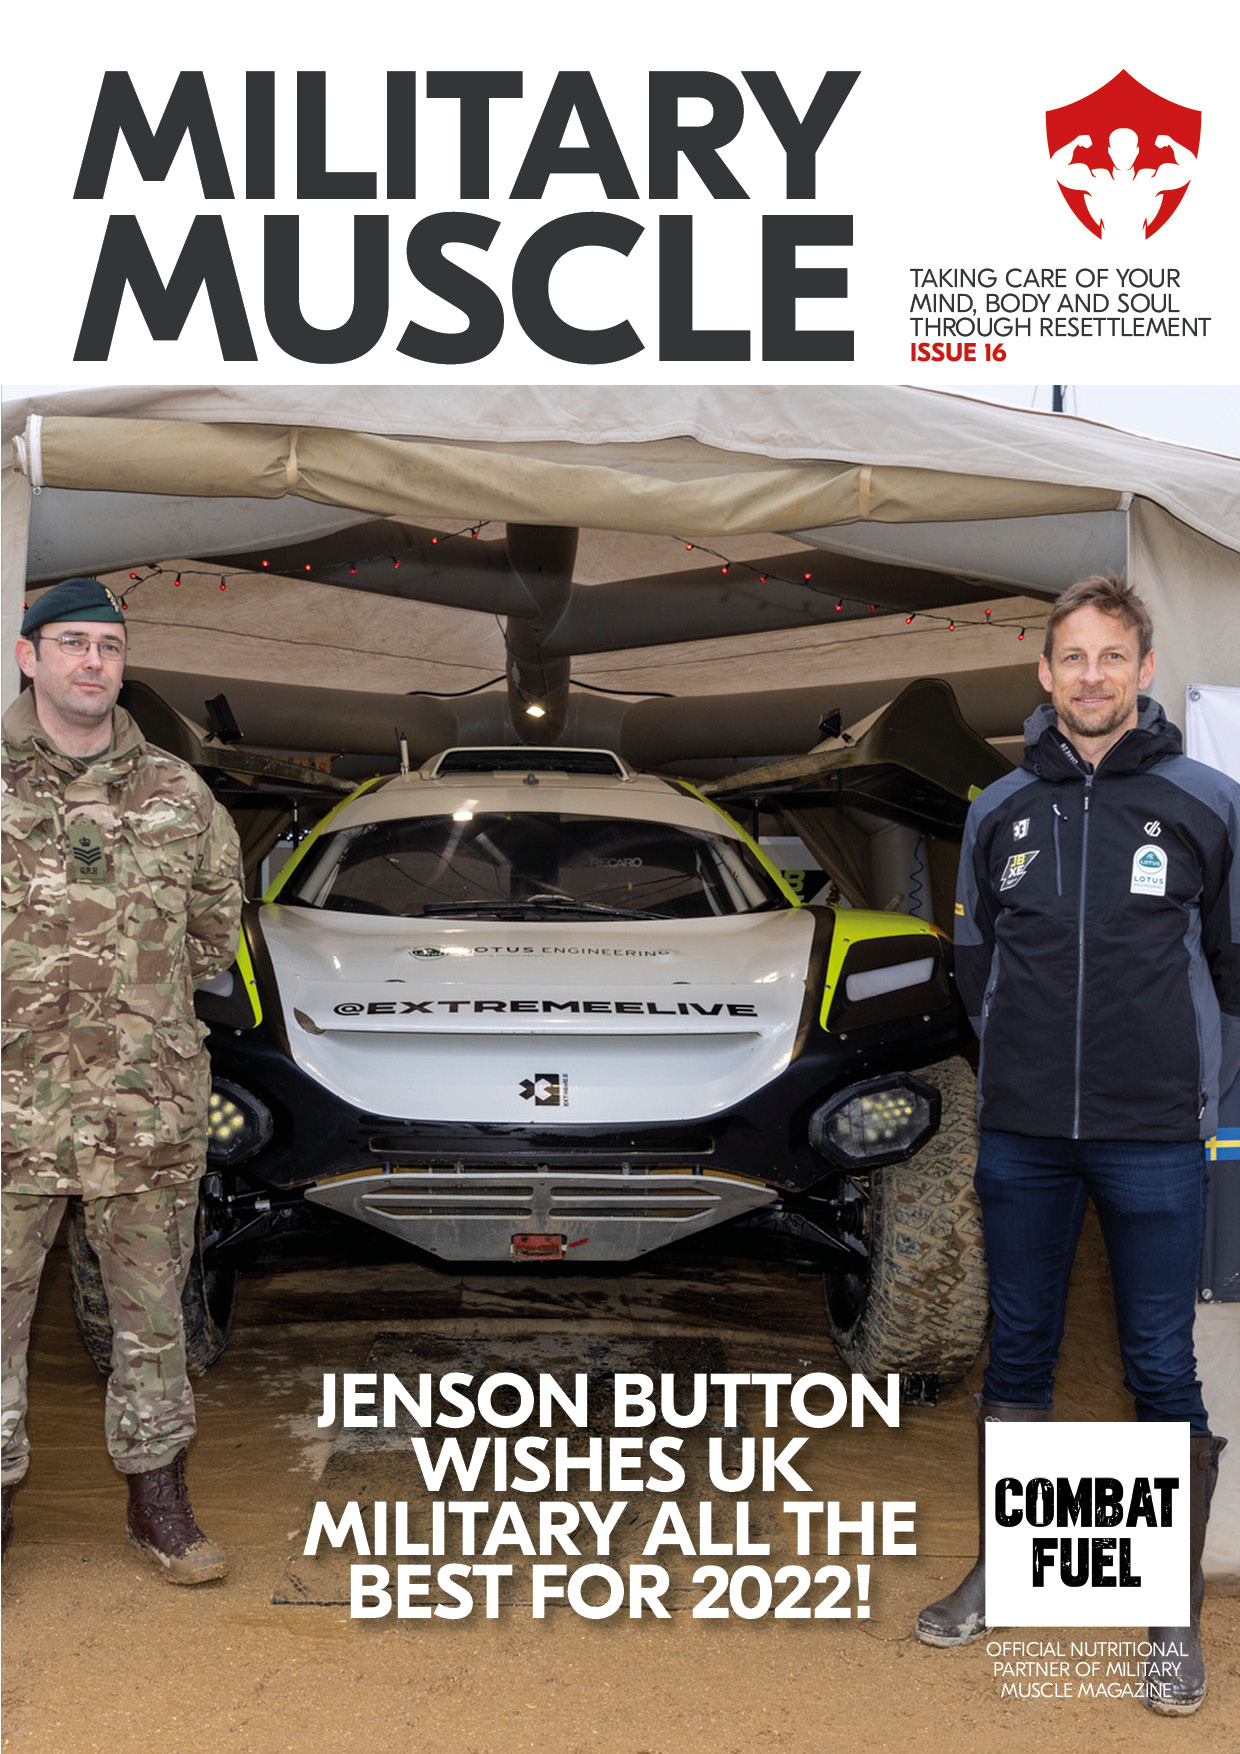 Don’t Forget! The New Issue Of Military Muscle Magazine Can Be Found Inside The Latest Pathfinder